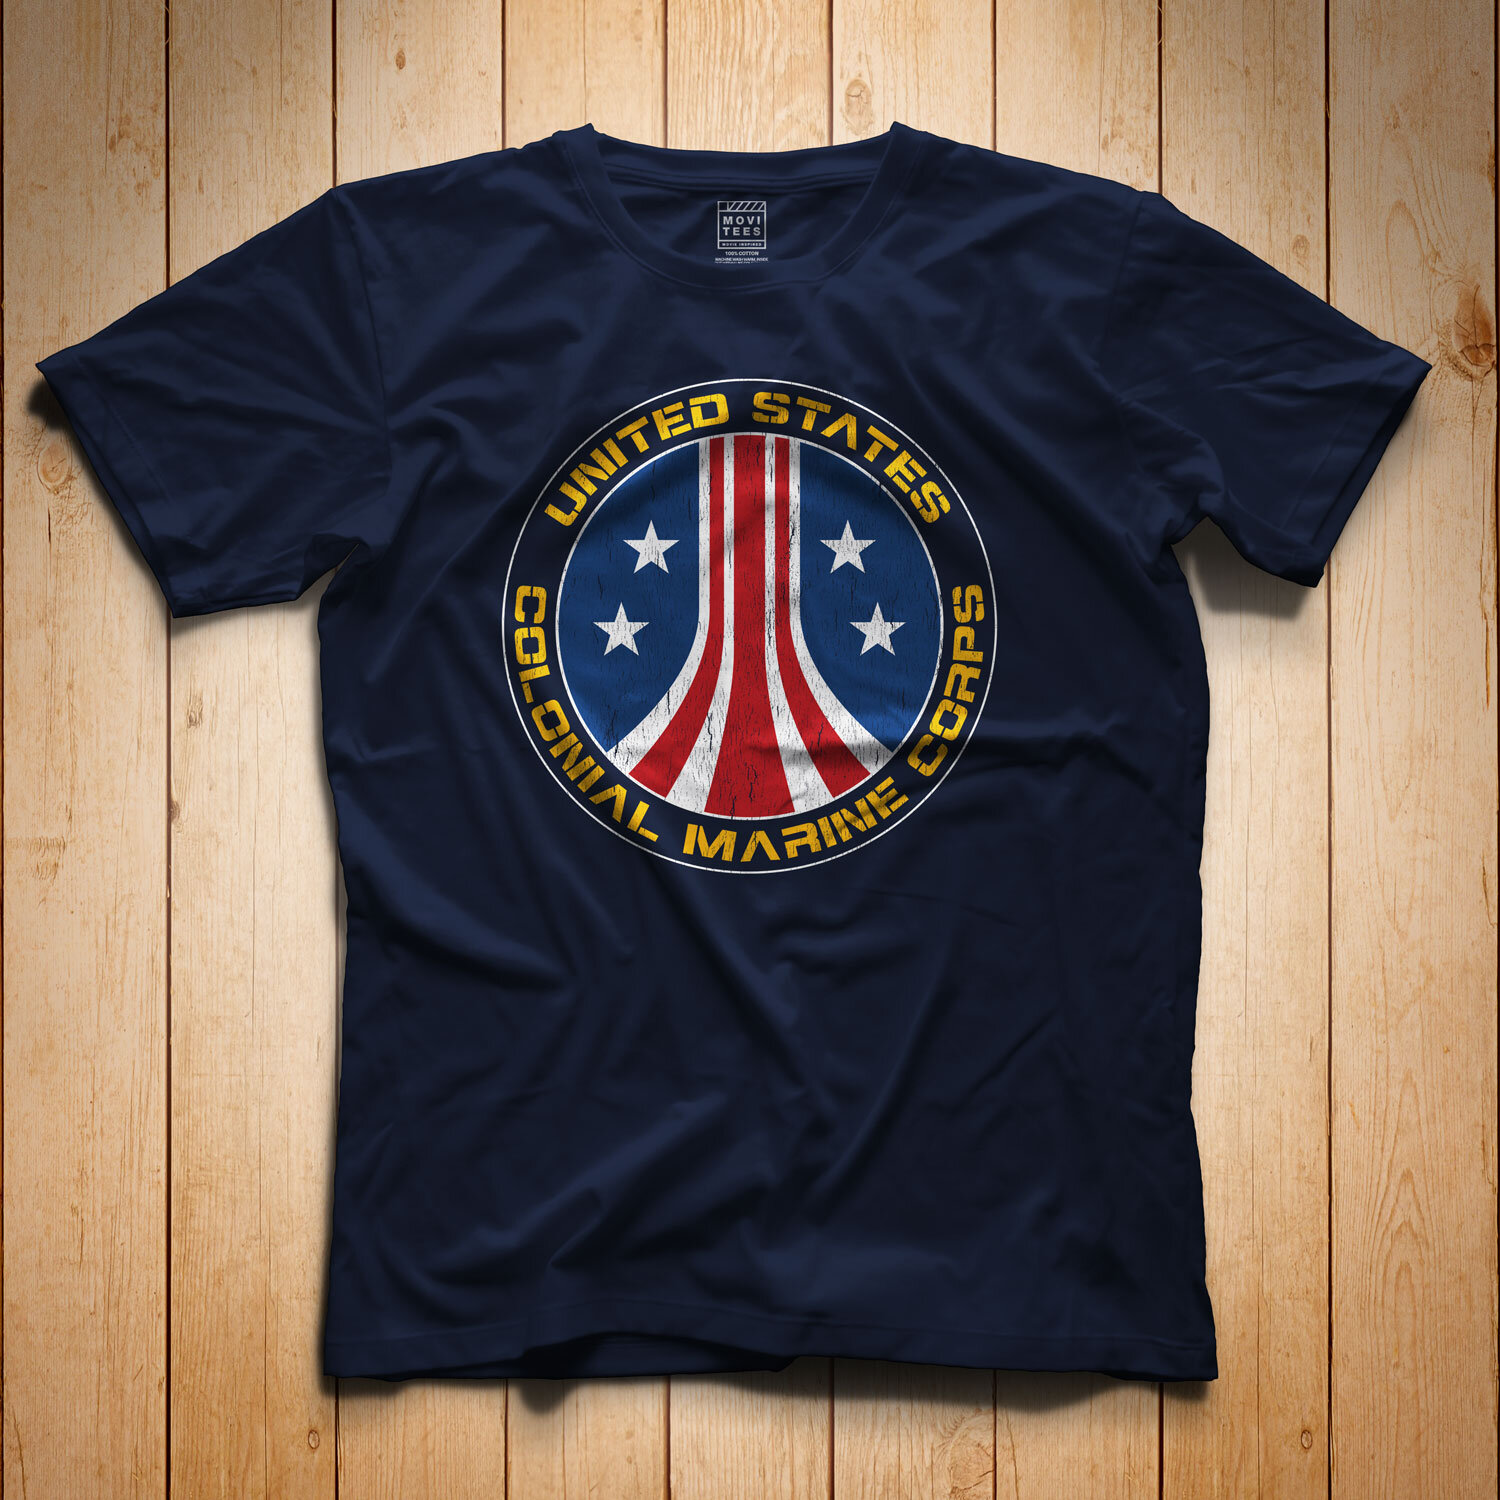 United States Colonial Marine Corps T-Shirt inspired by Aliens ...